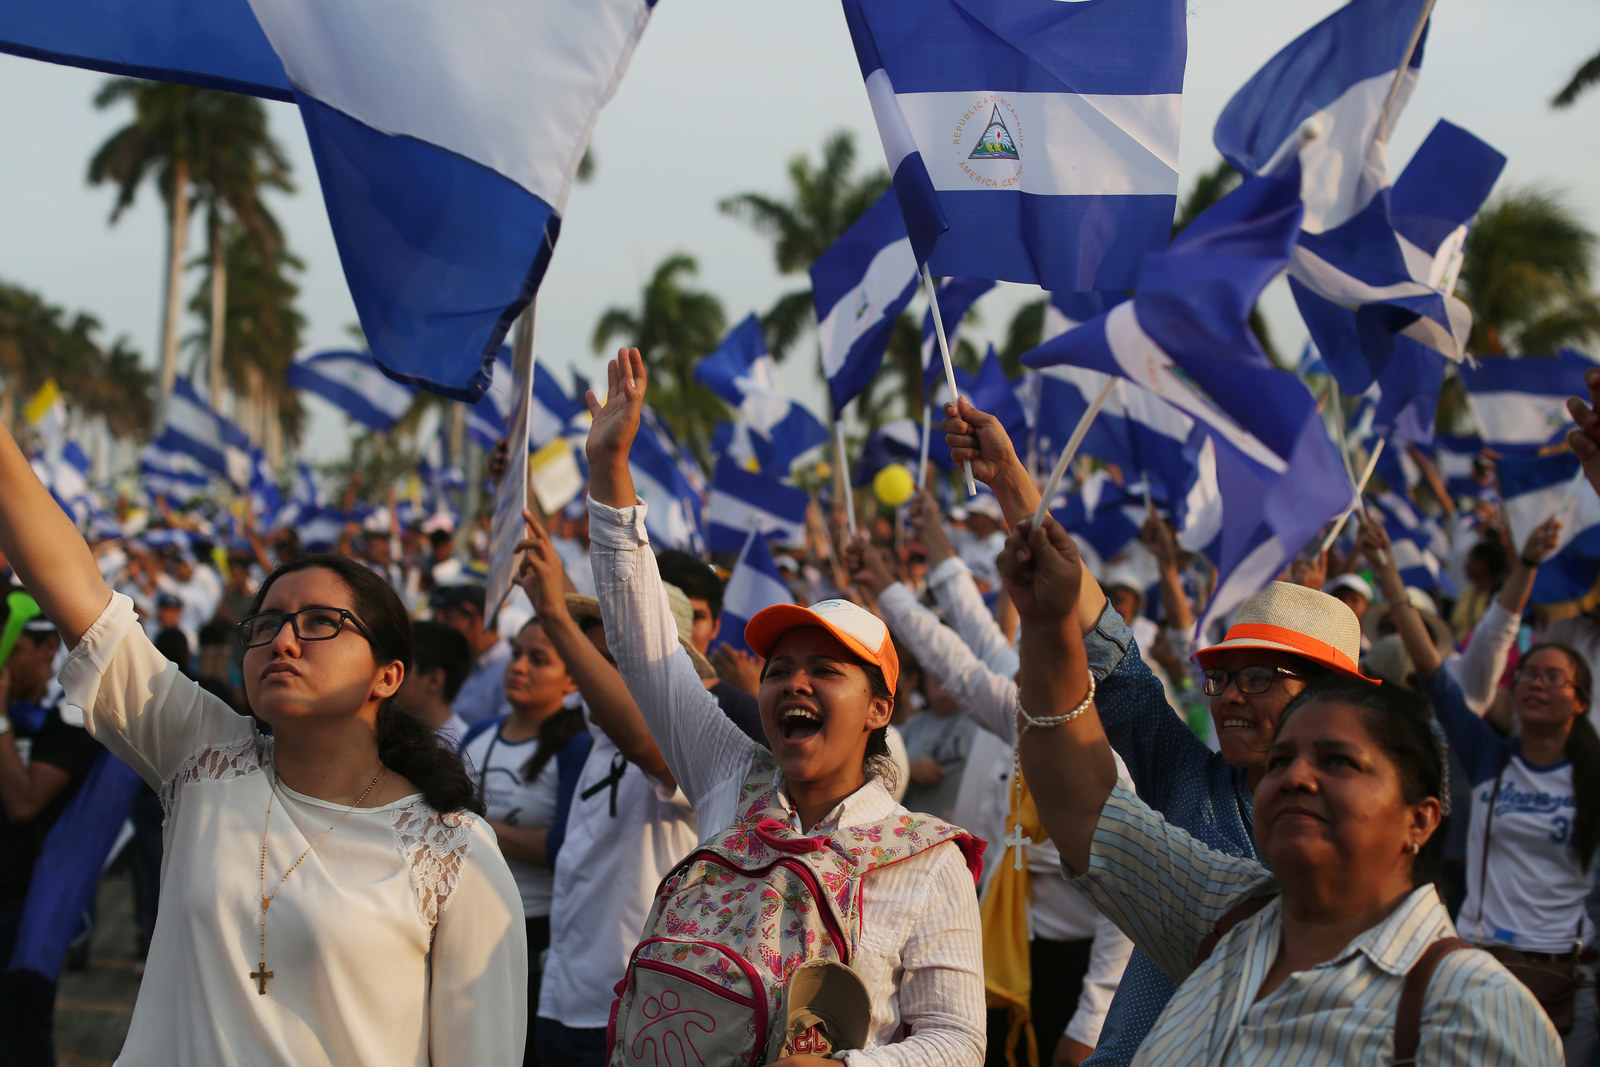 Tuesday is a national holiday in Nicaragua